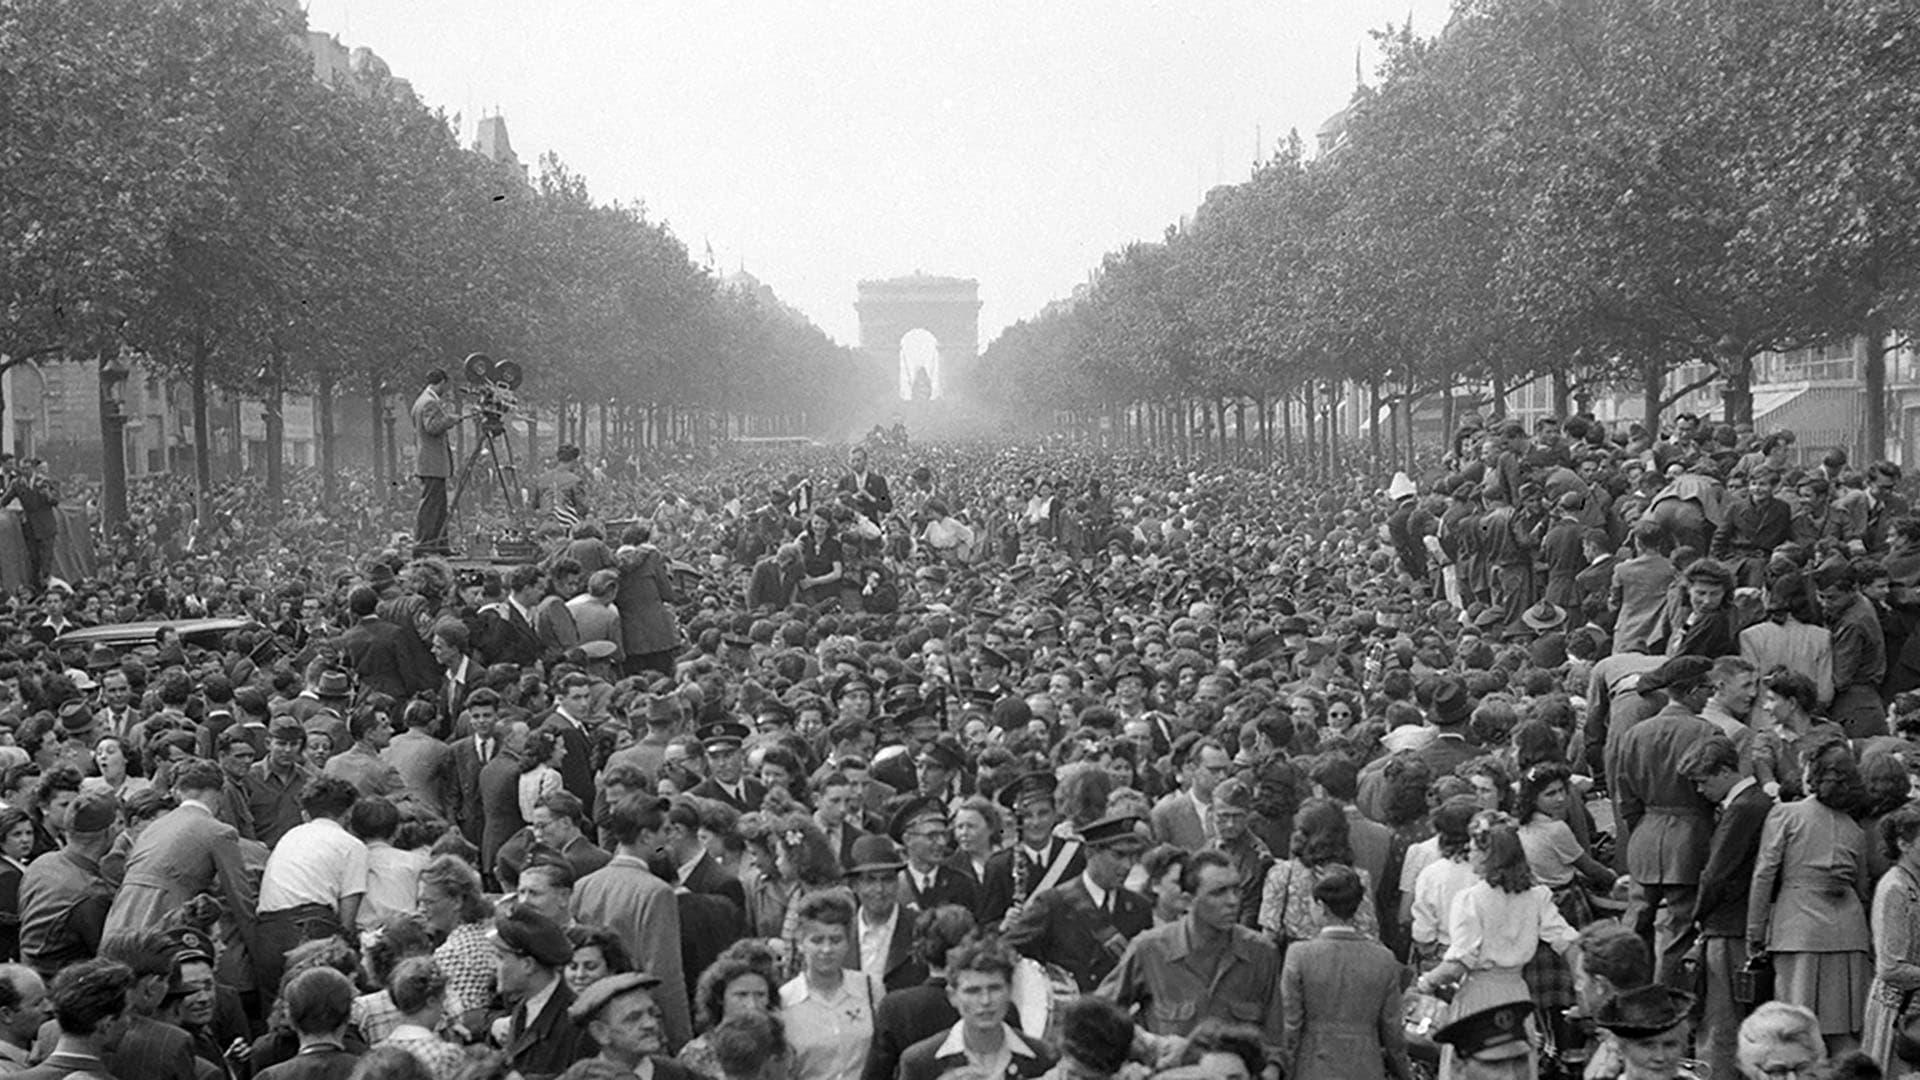 Capitulation, the Final Hours that Ended World War II backdrop